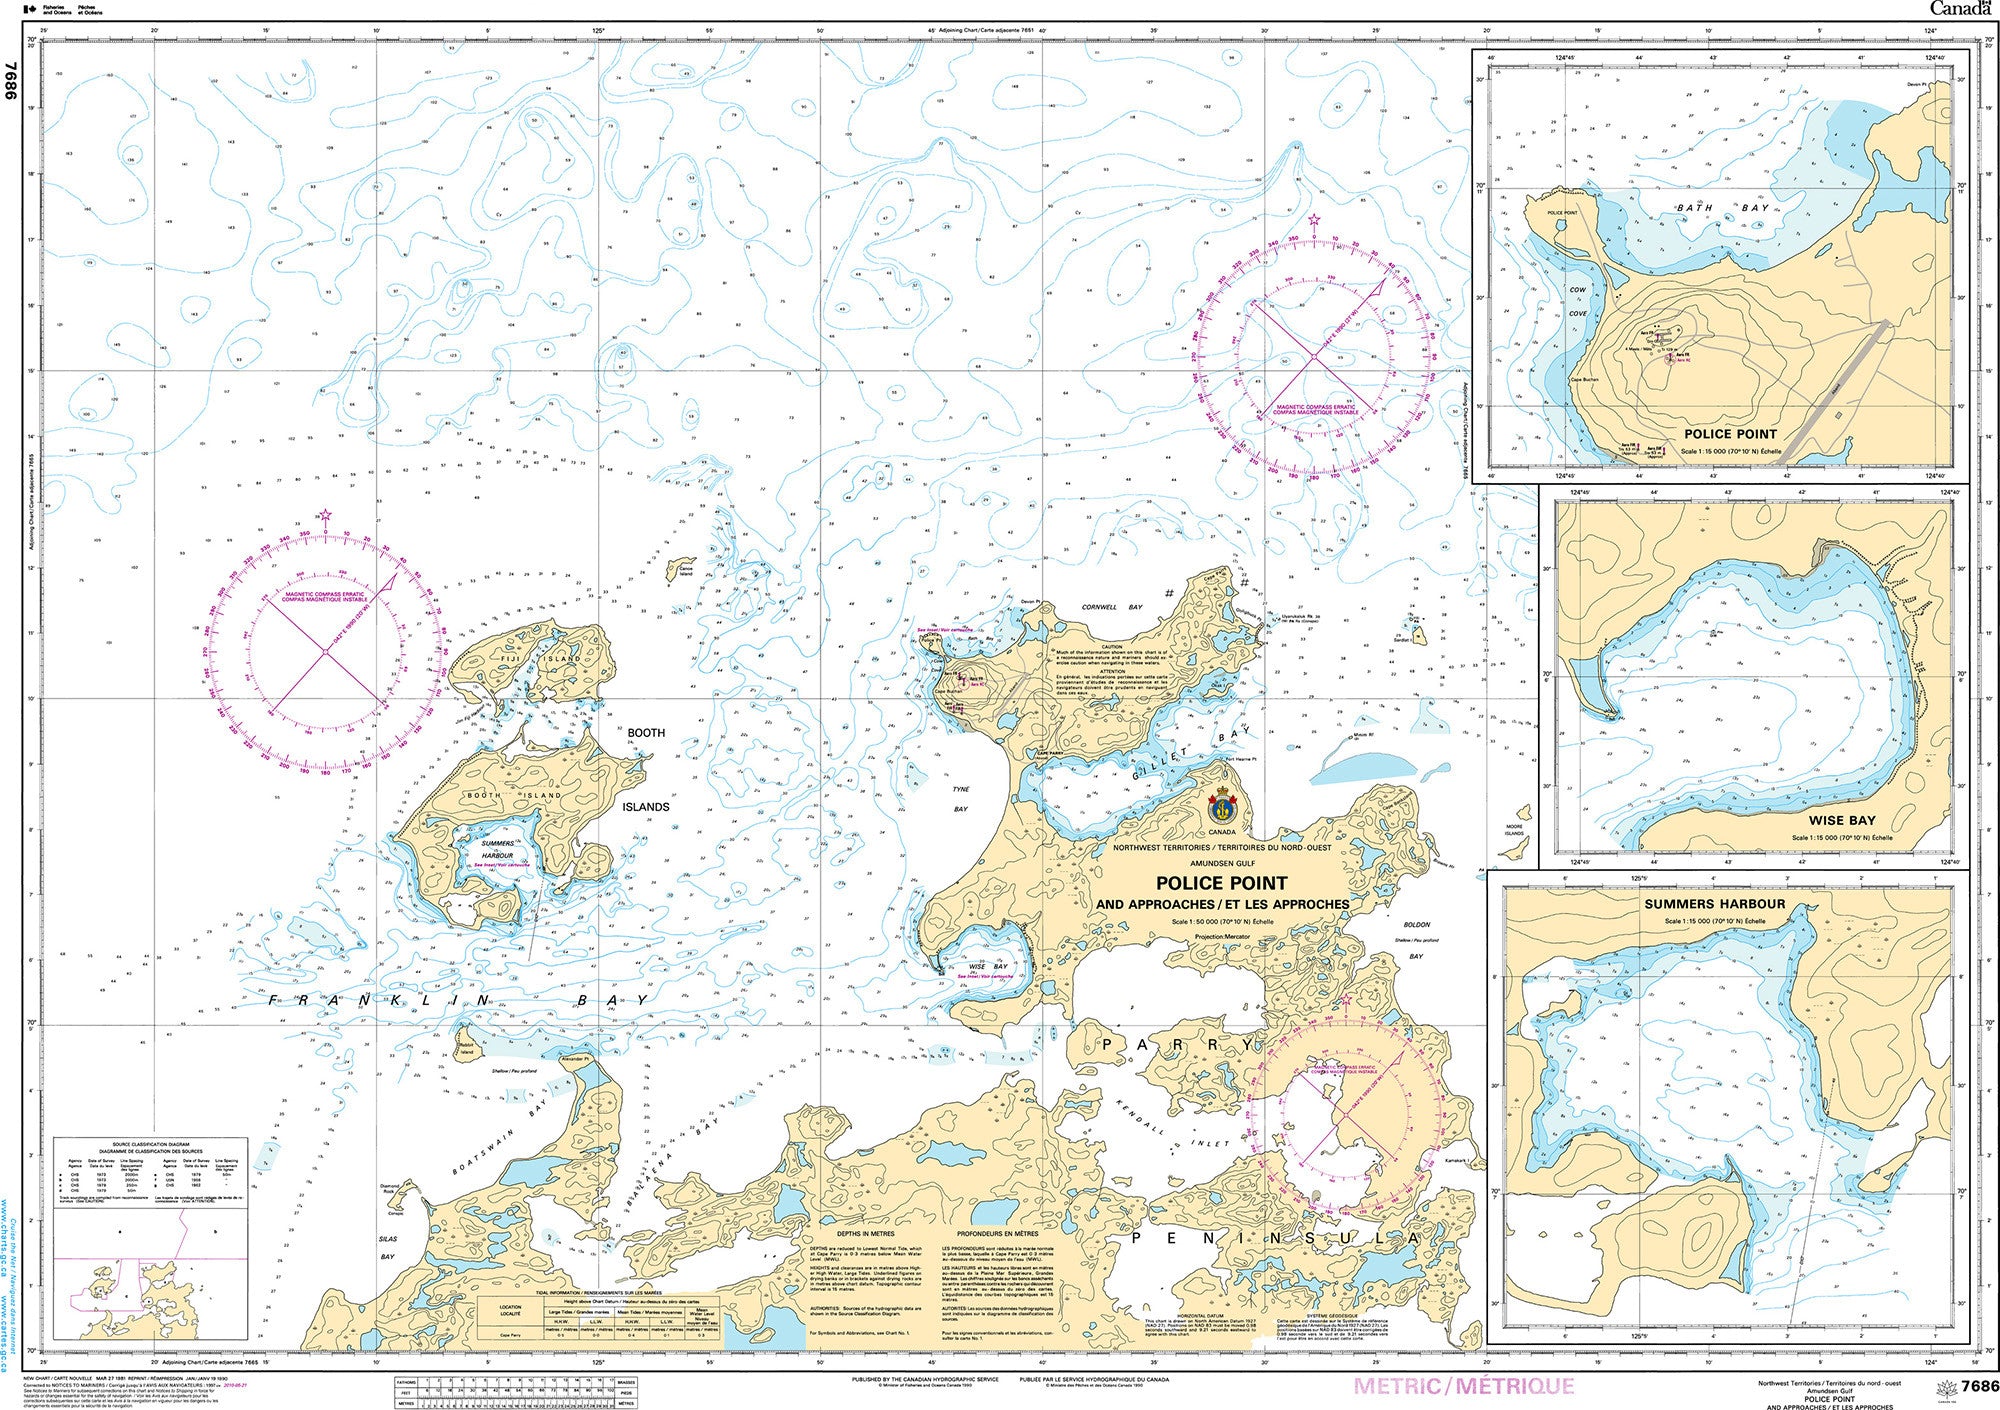 Canadian Hydrographic Service Nautical Chart CHS7686: Police Point And Approaches/ Et Les Approches